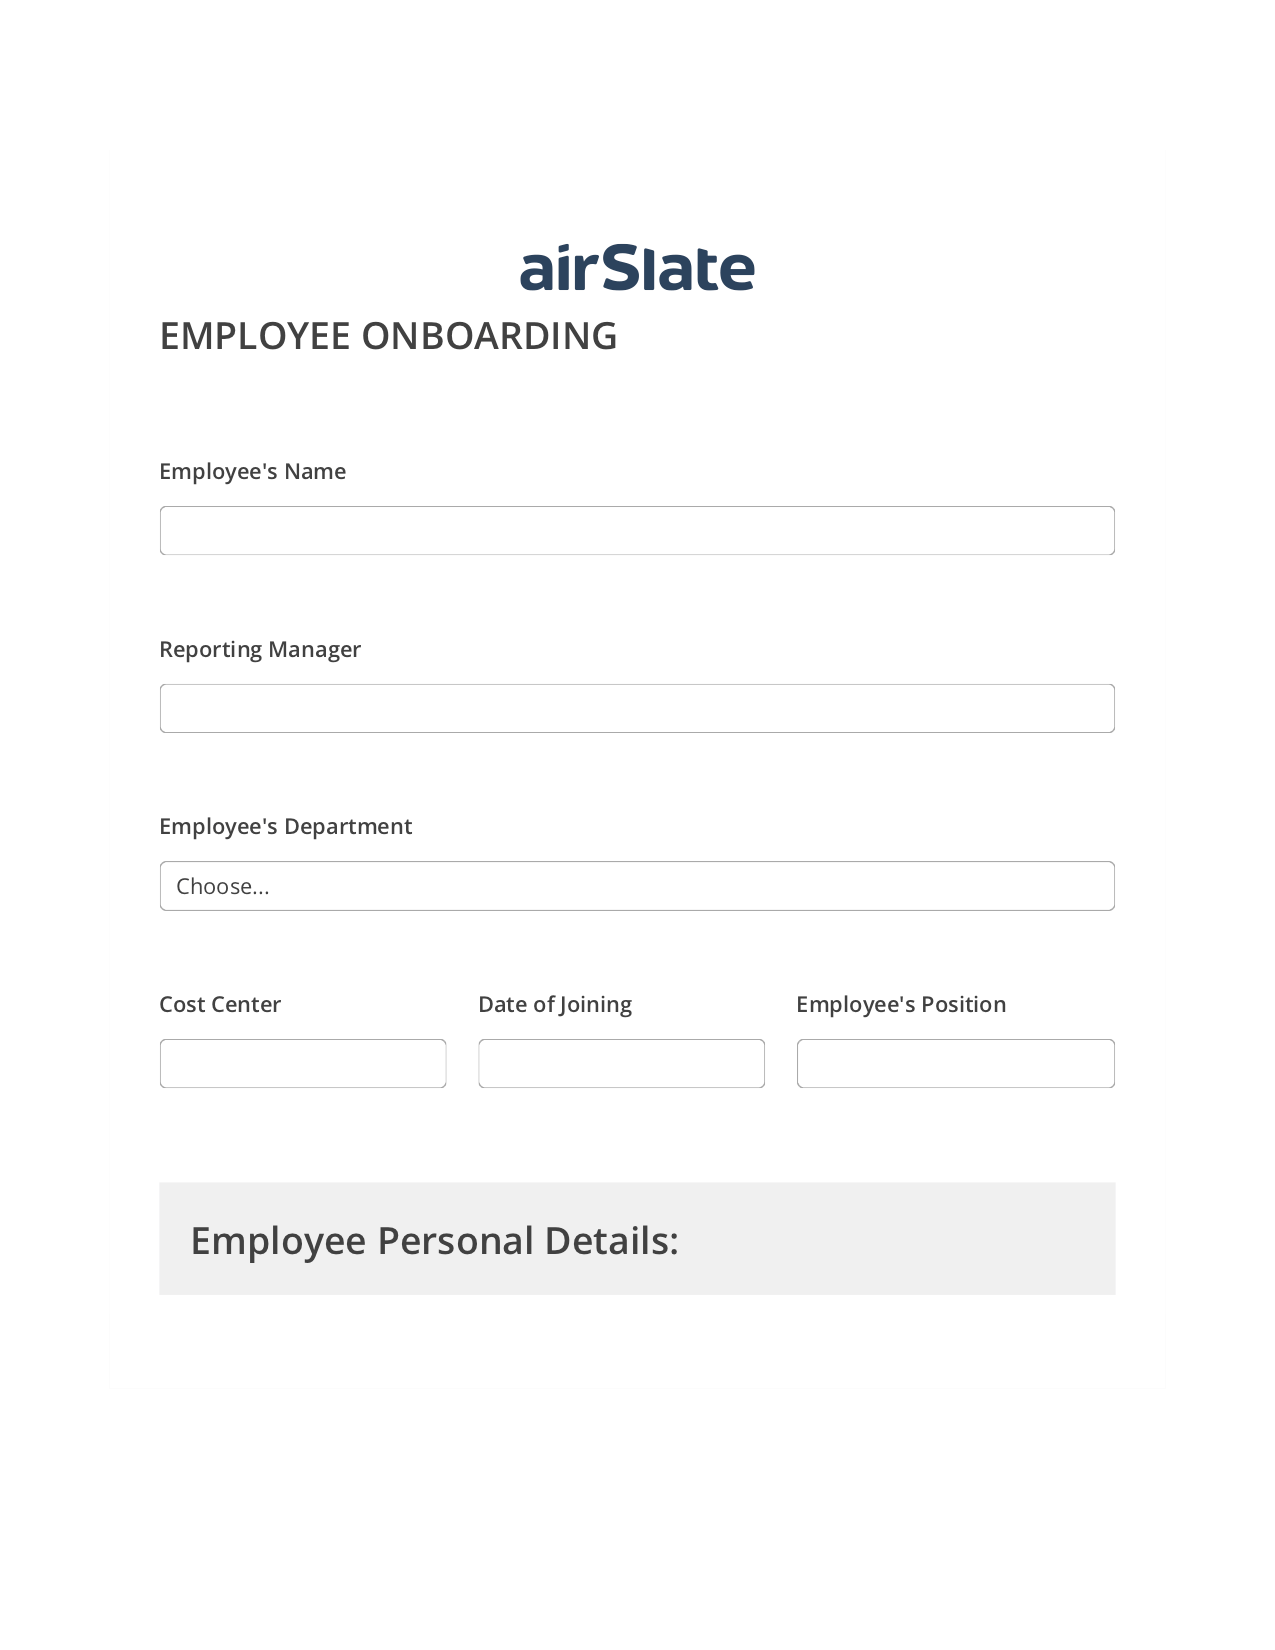 Employee Onboarding Workflow Pre-fill Slate from MS Dynamics 365 record, Create slate from another Flow Bot, Export to Excel 365 Bot